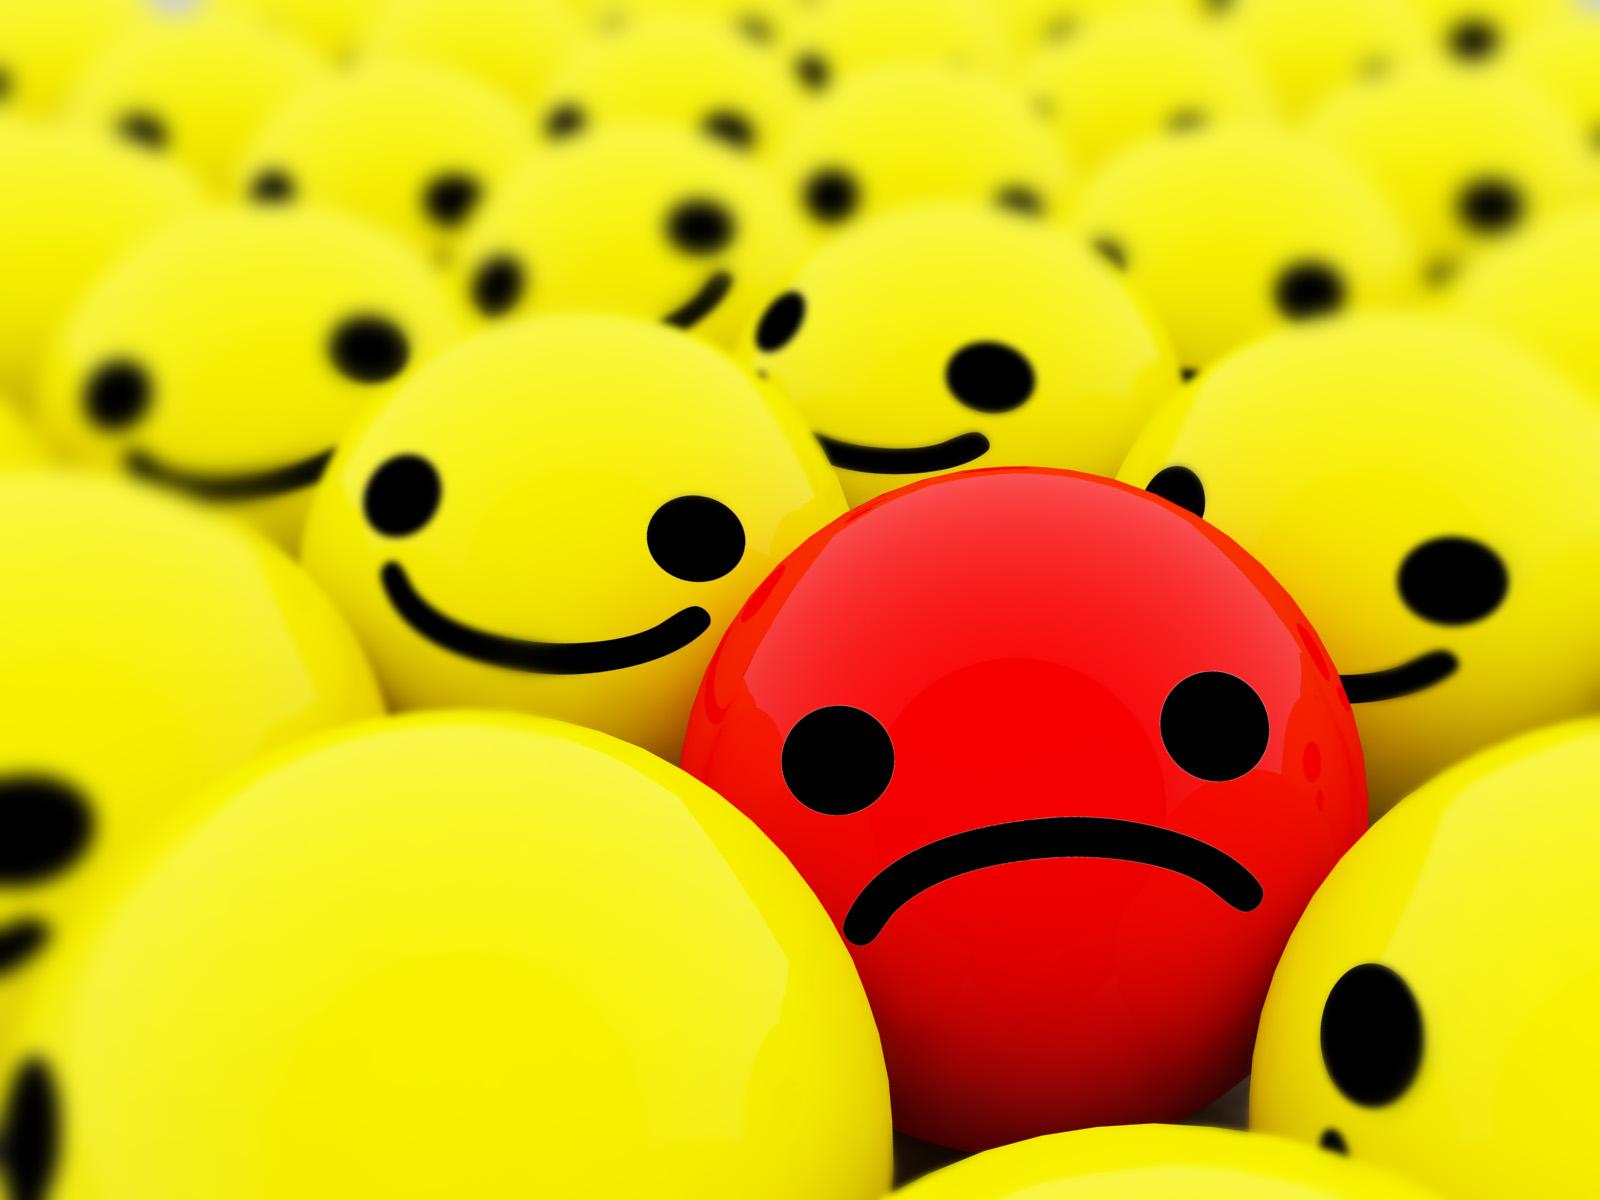 Black and White Wallpaper: Yellow Smileys and One Red Smiley Wallpaper